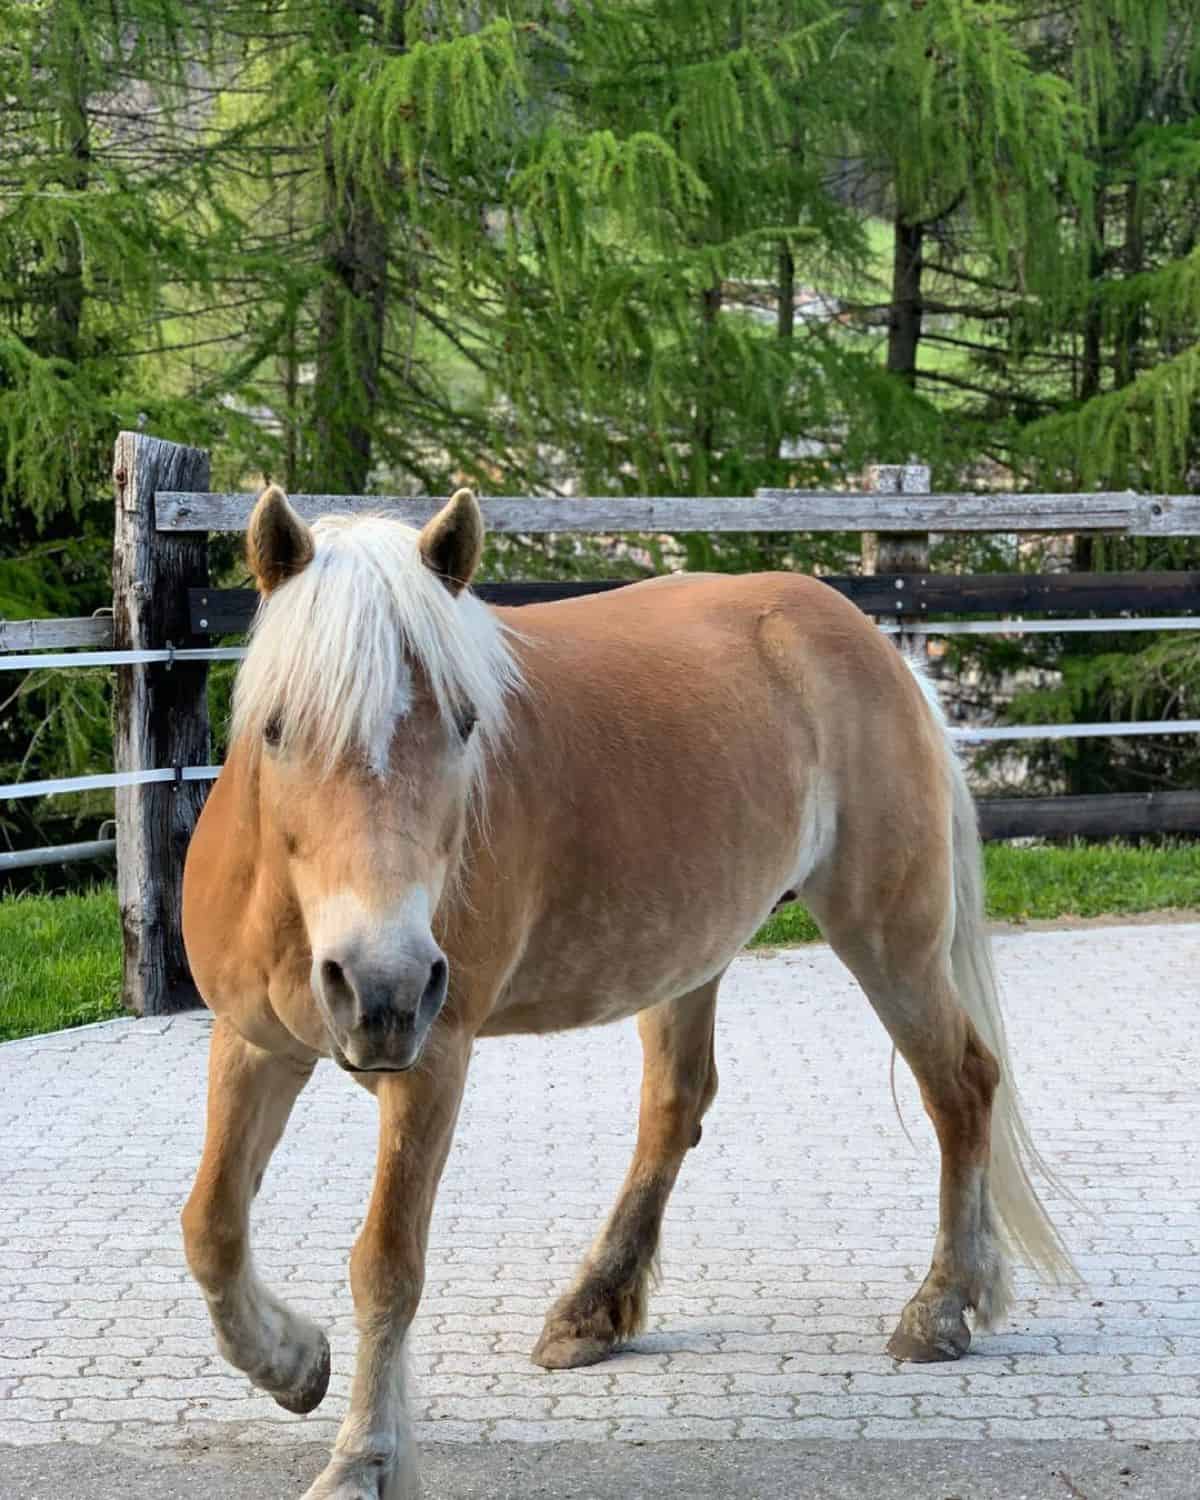 A brown Haflinger horse with a white tail and mane.